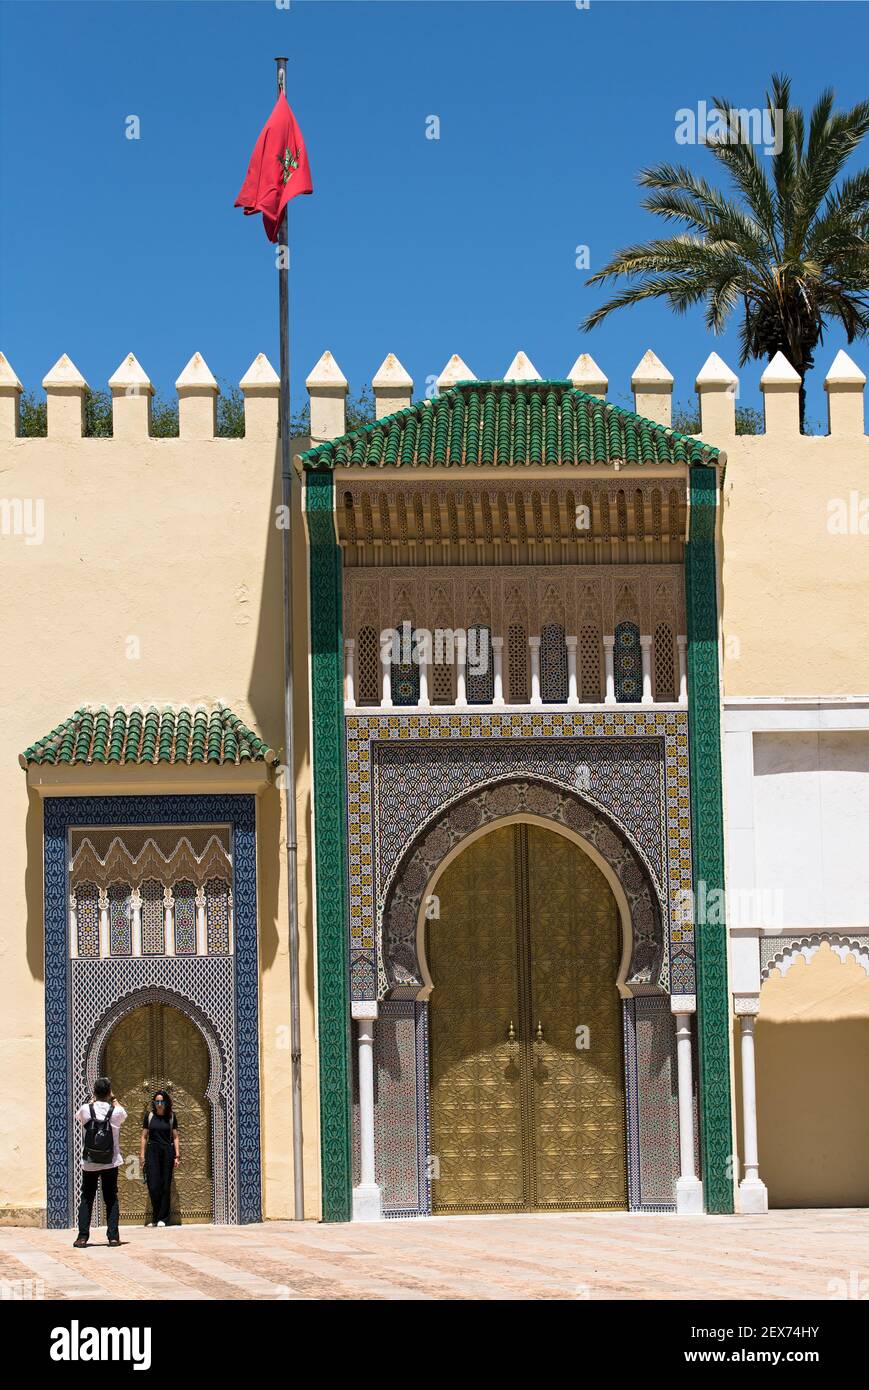 Morocco, Fez, Dar el-Makhzen, exterior of  the royal palace in Fez, Moorish architecture Stock Photo